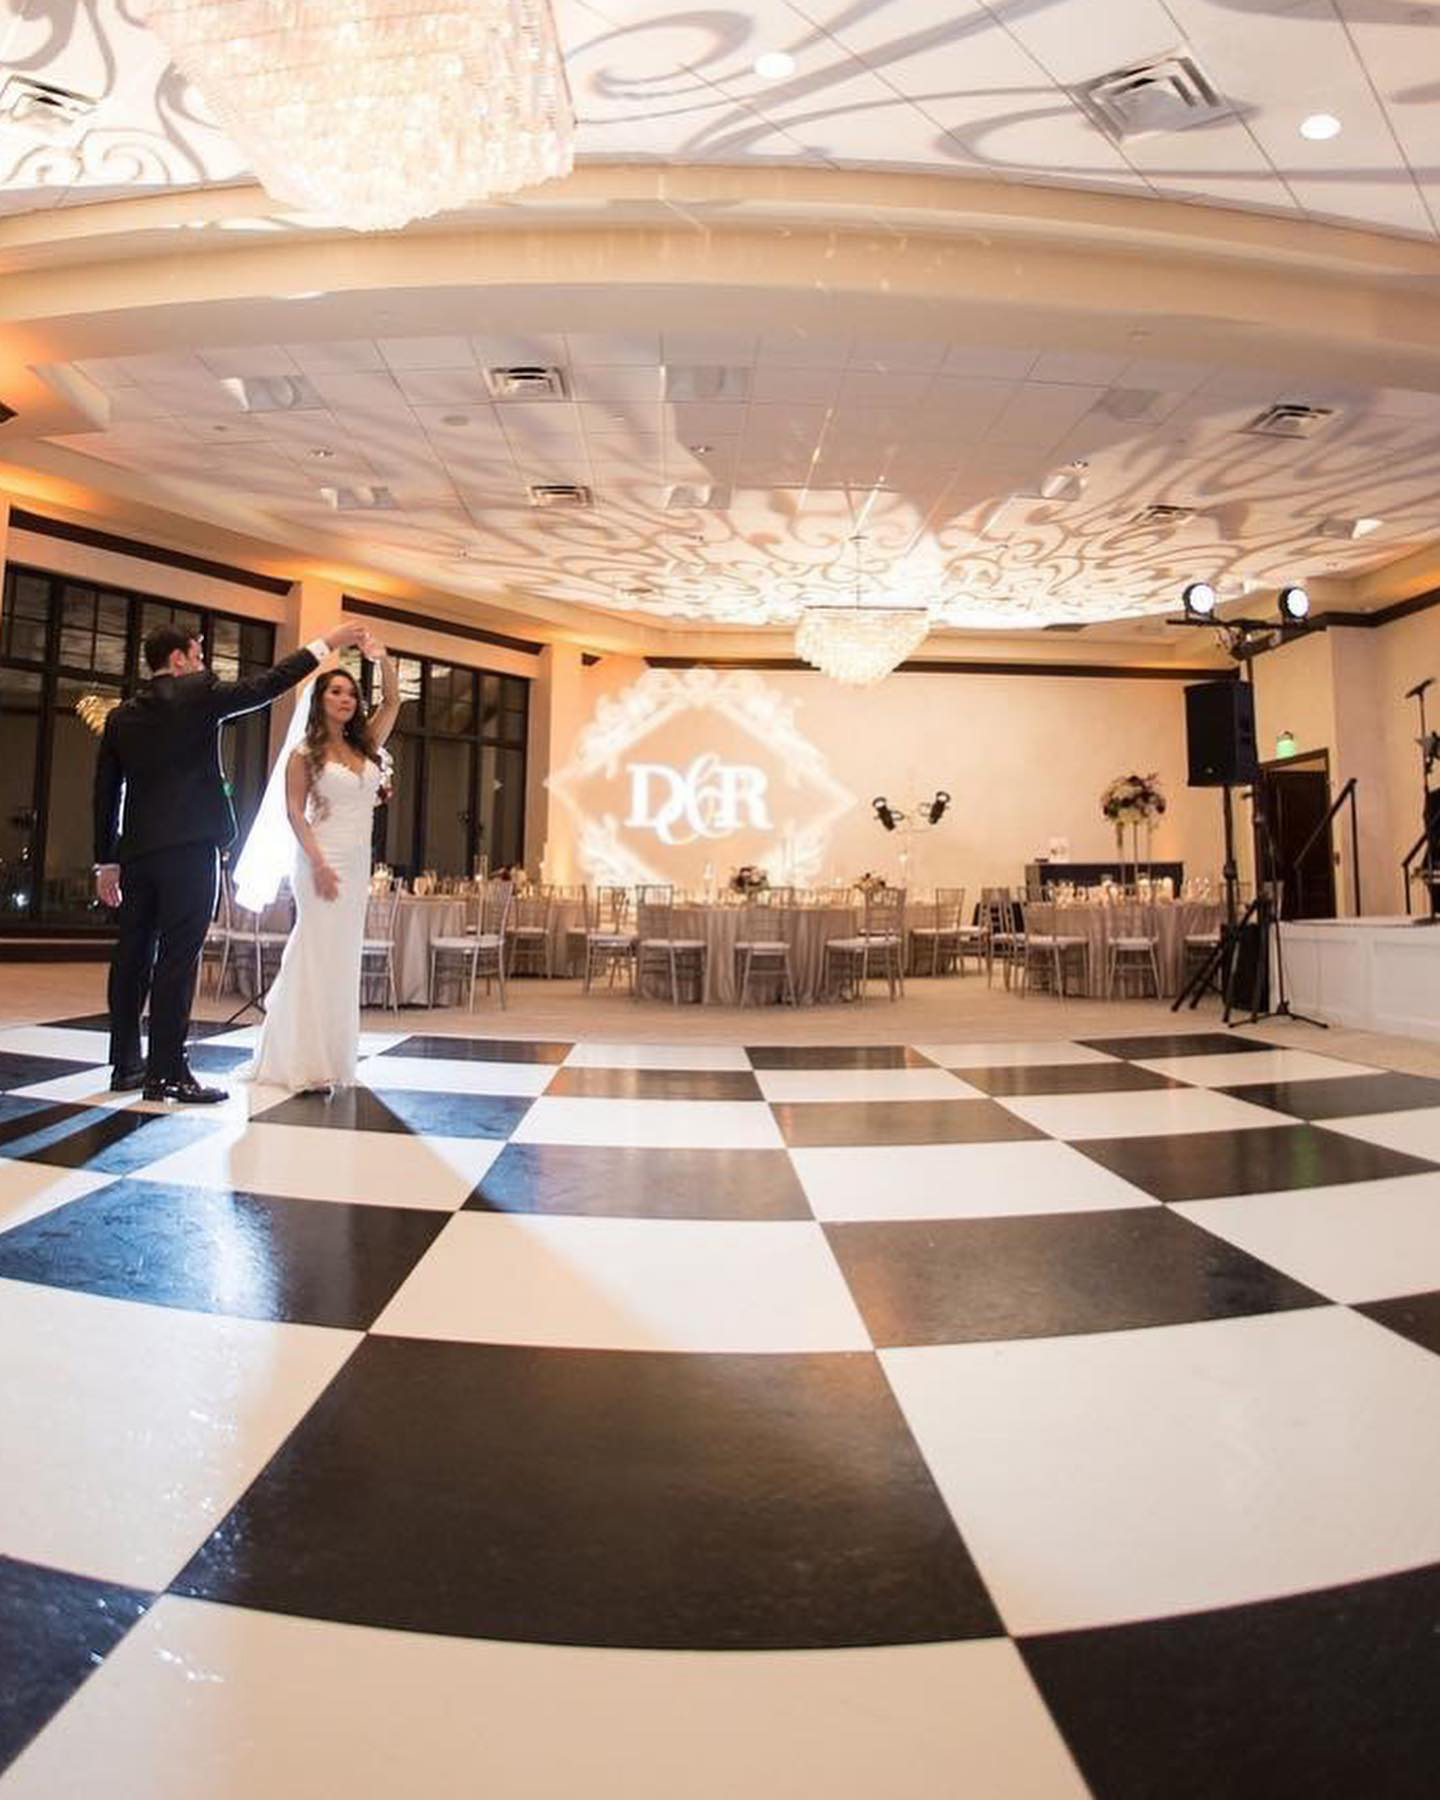 Slate Black and White Plus wedding dance floor at an indoor venue